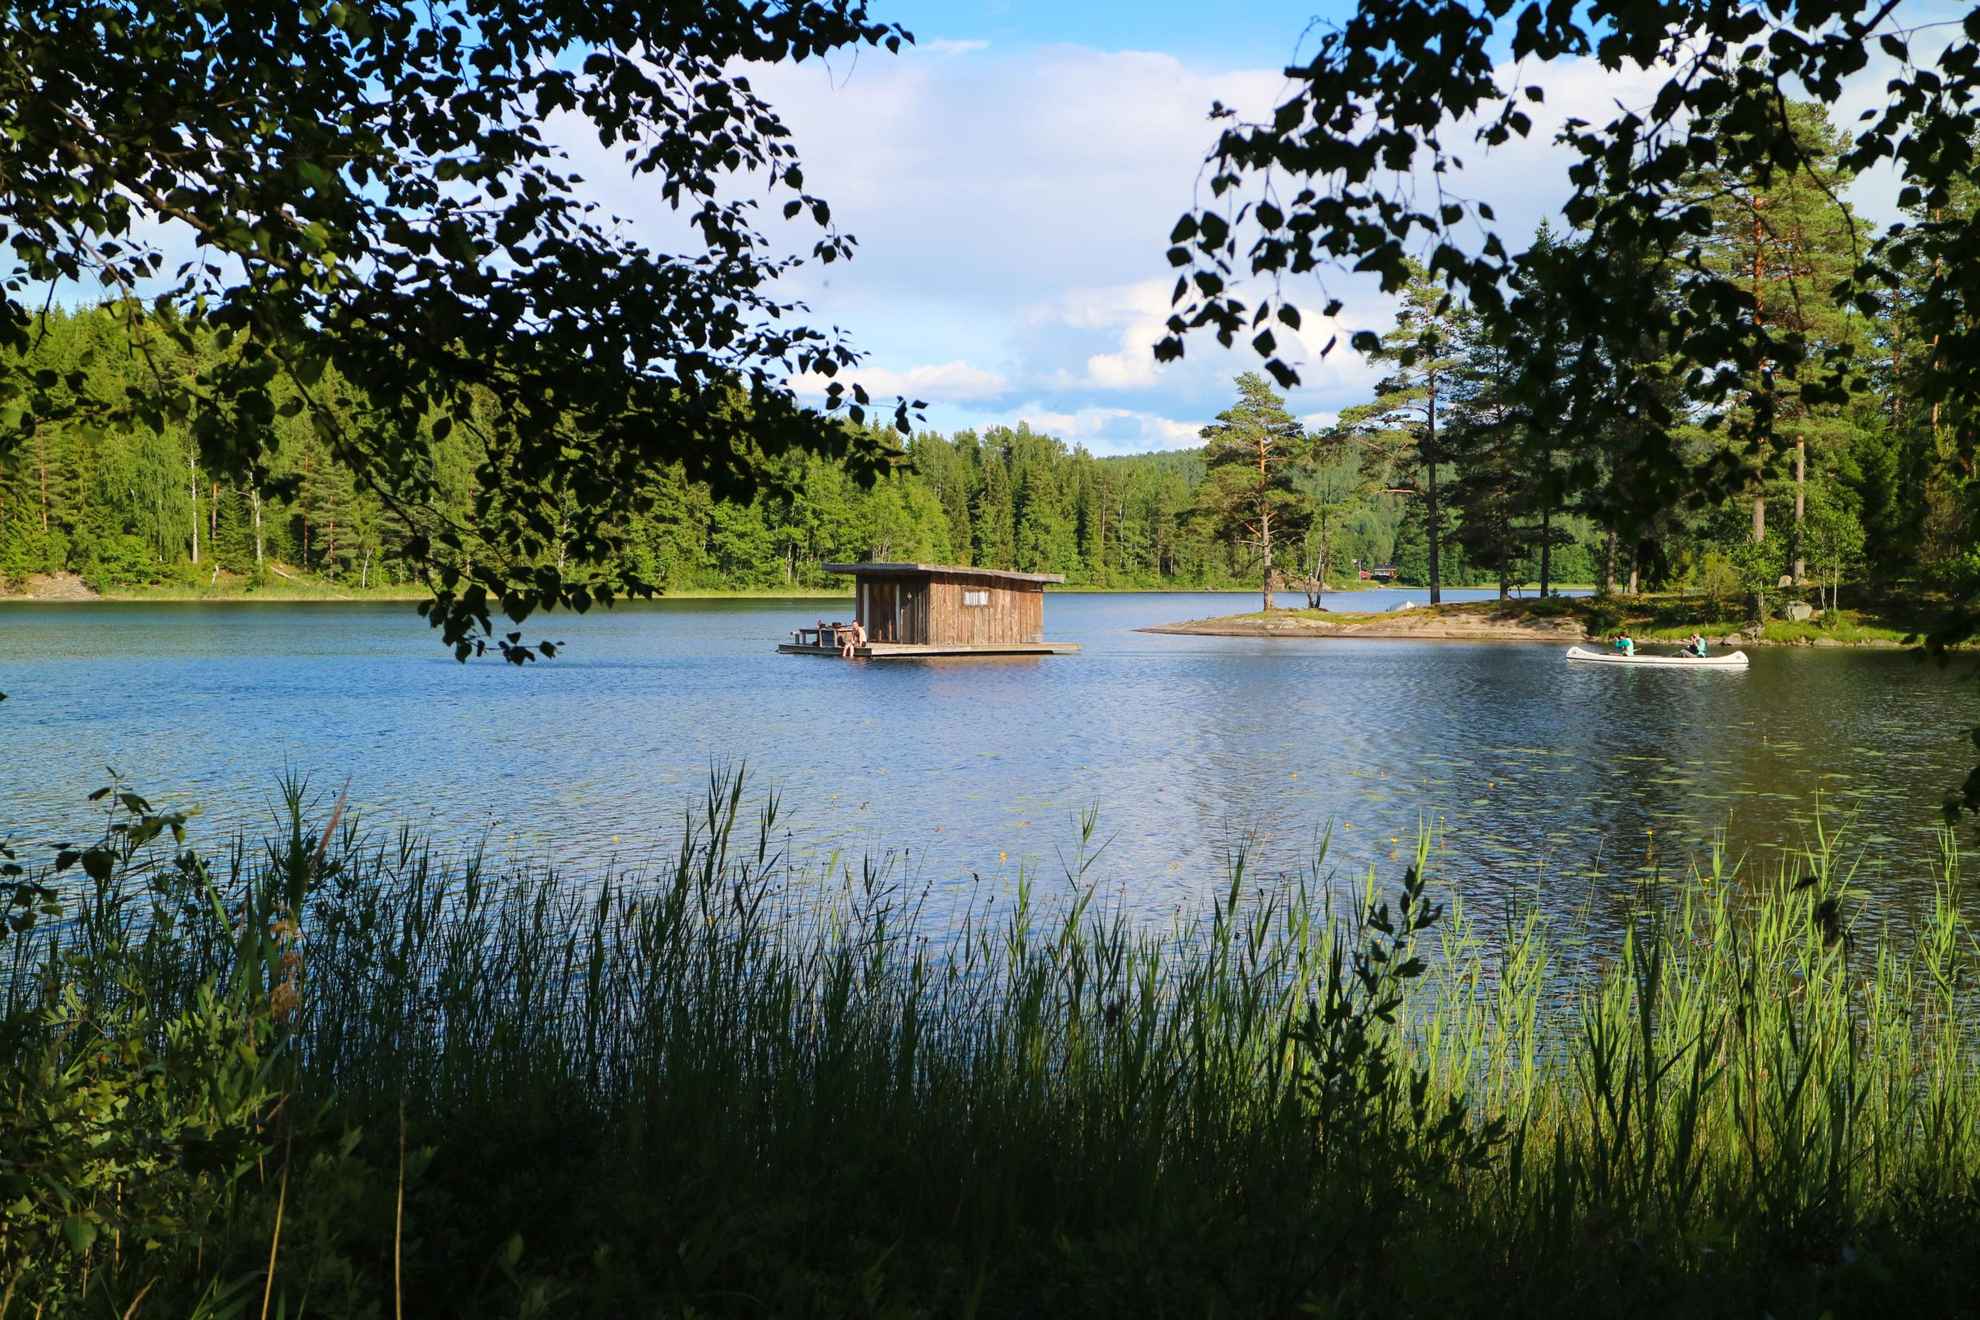 A cottage floating in a lake at Naturbyn and someone passing by it in a canoe. The lake is surrounded by forest.